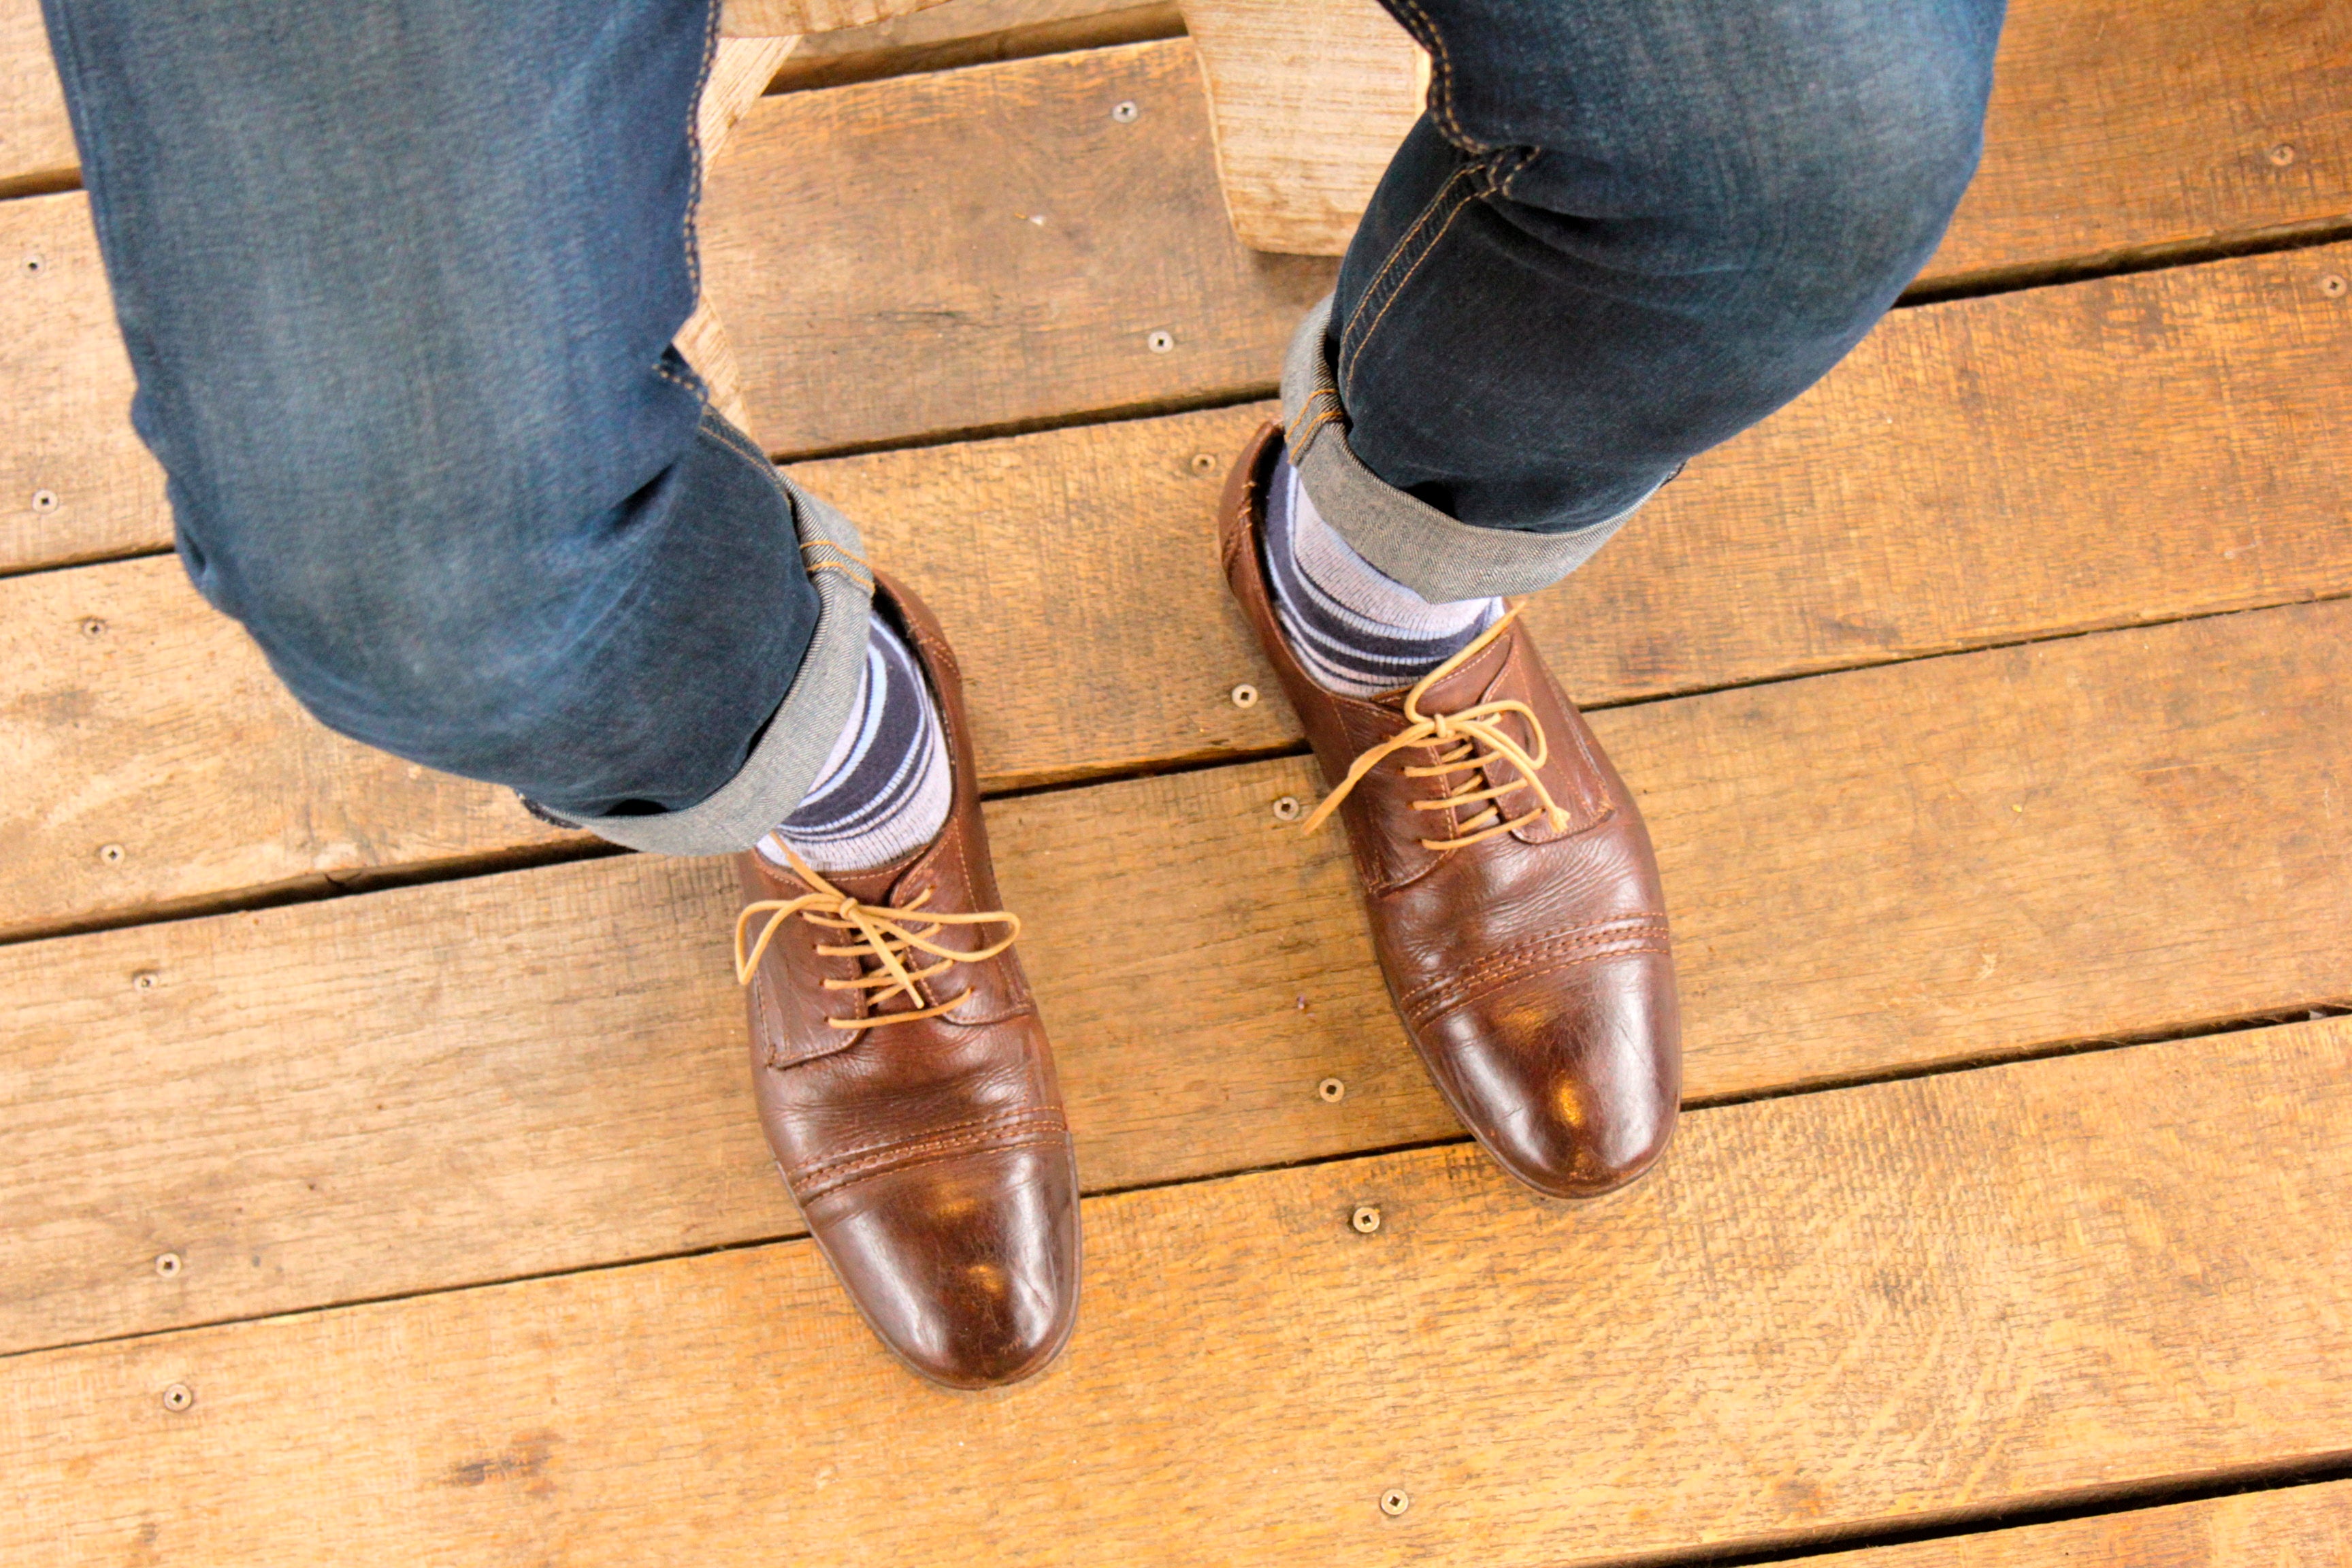 blue and grey striped over the calf dress socks, brown dress shoes, and blue jeans